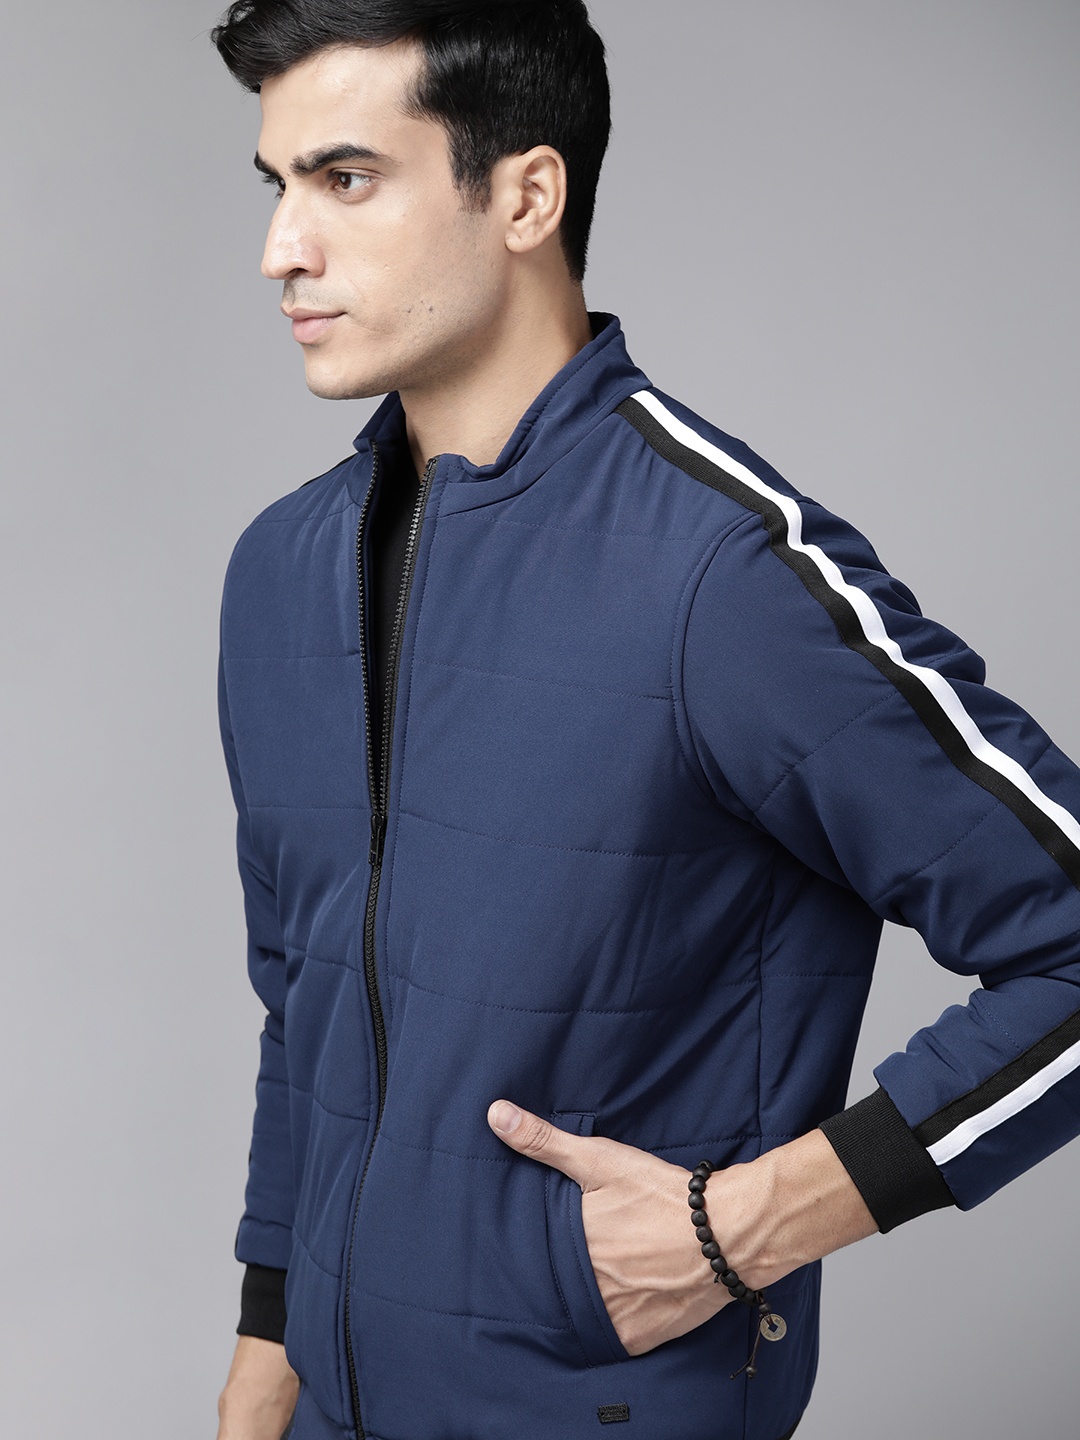 Roadster Men Navy Blue Solid Padded Jacket - buy at the price of $19.40 ...